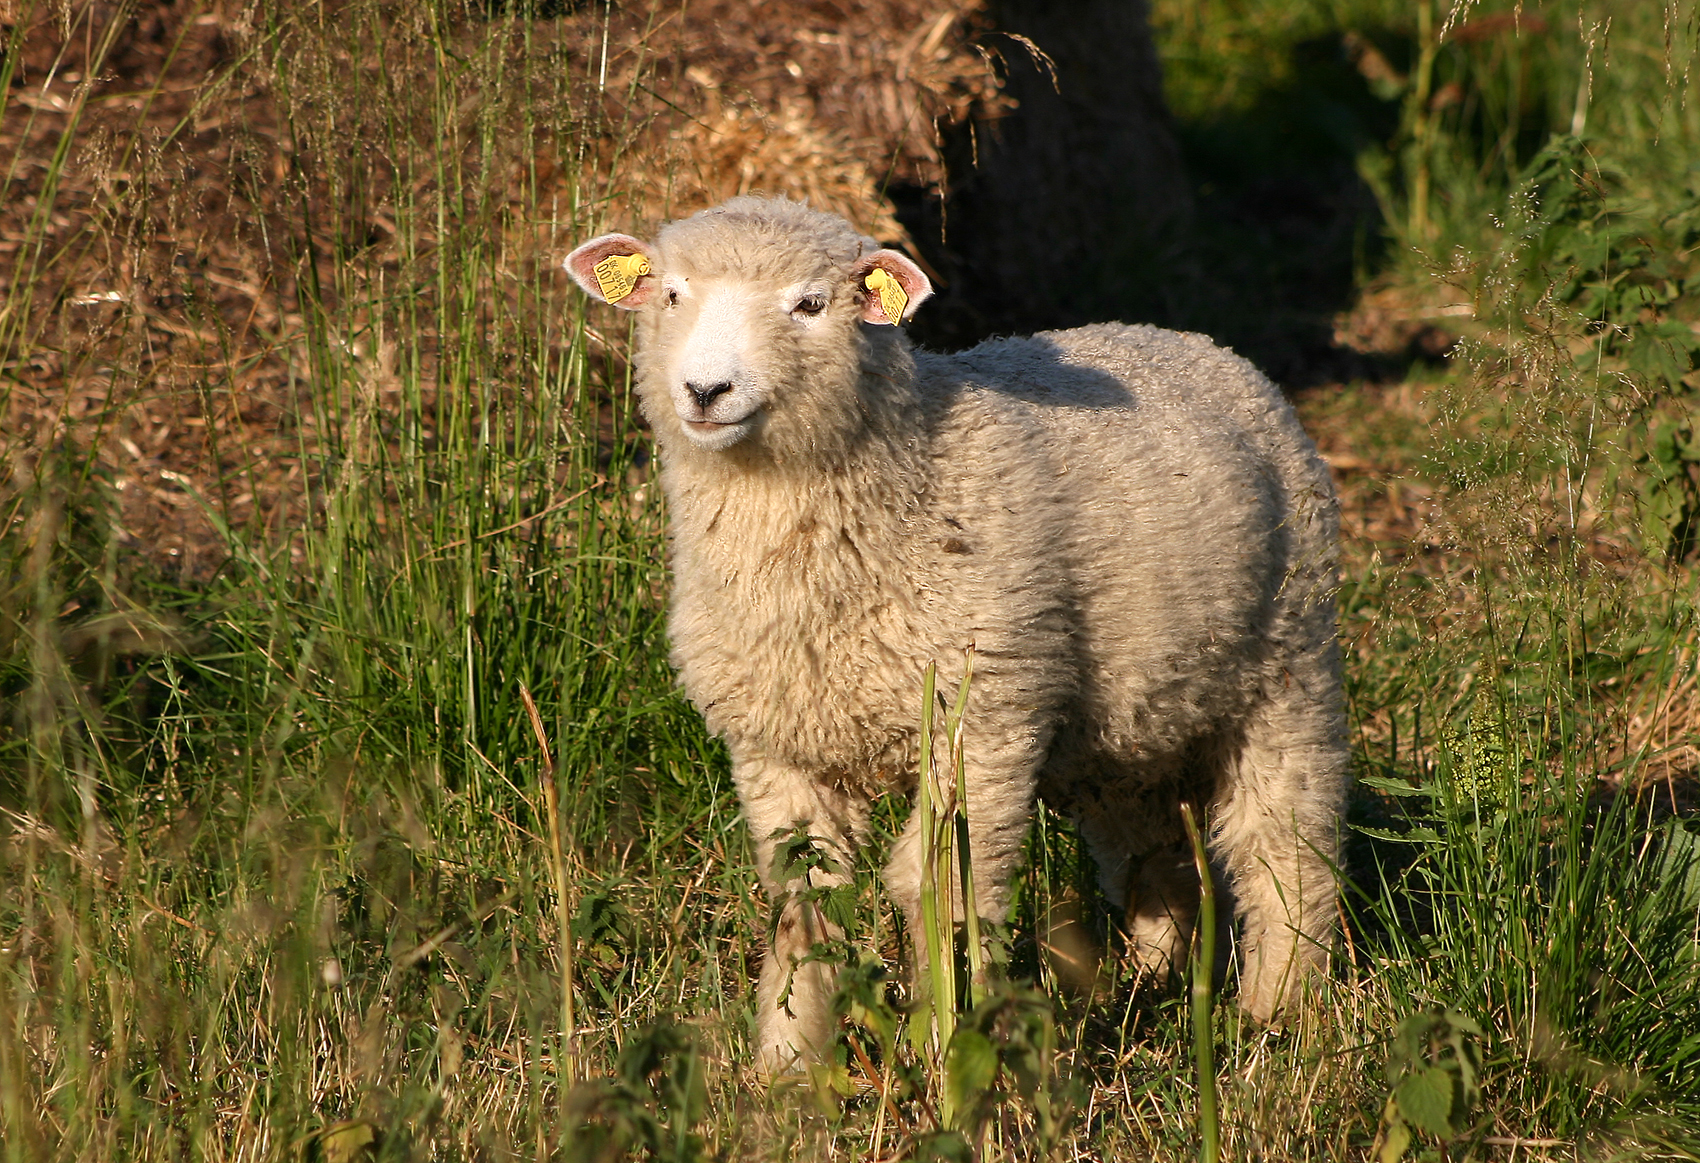 Klitfåret, also called the Danish Landrace Sheep, is an example of an old Danish sheep breed that is threatened with extinction. This sheep is part of the restoration project at Vorup Enge, Randers, Denmark; it was taken by Malene Thyssen and released under a GNU Free Documentation License, Version 1.2 through Wiki Commons